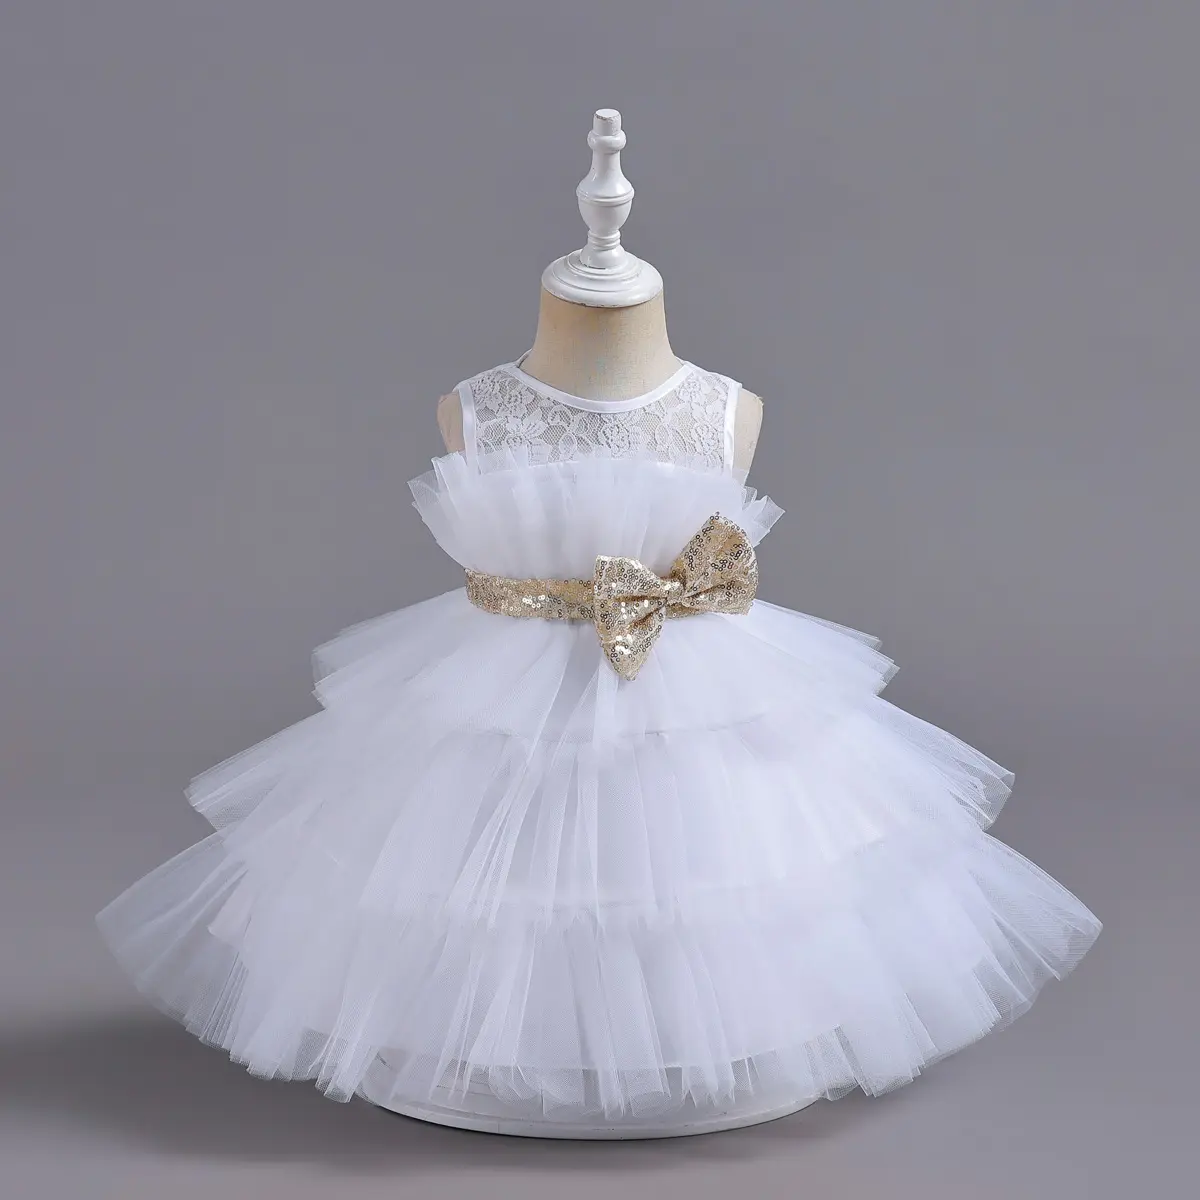 baby tulle dress